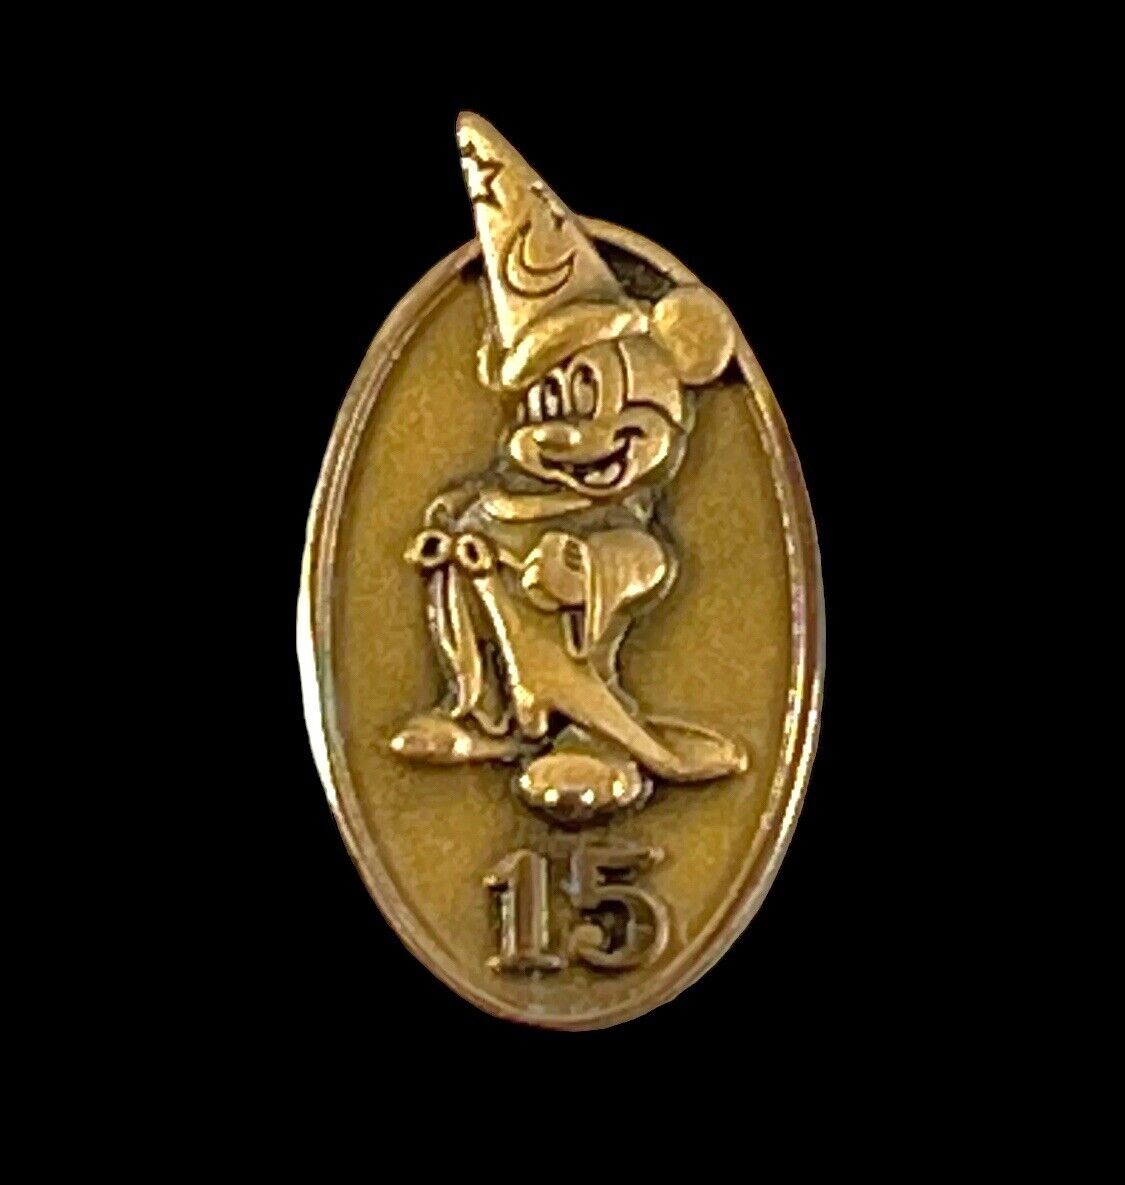 Disney Pin Cast Member Exclusive Service Award Year 15 Sorcerer Mickey Mouse